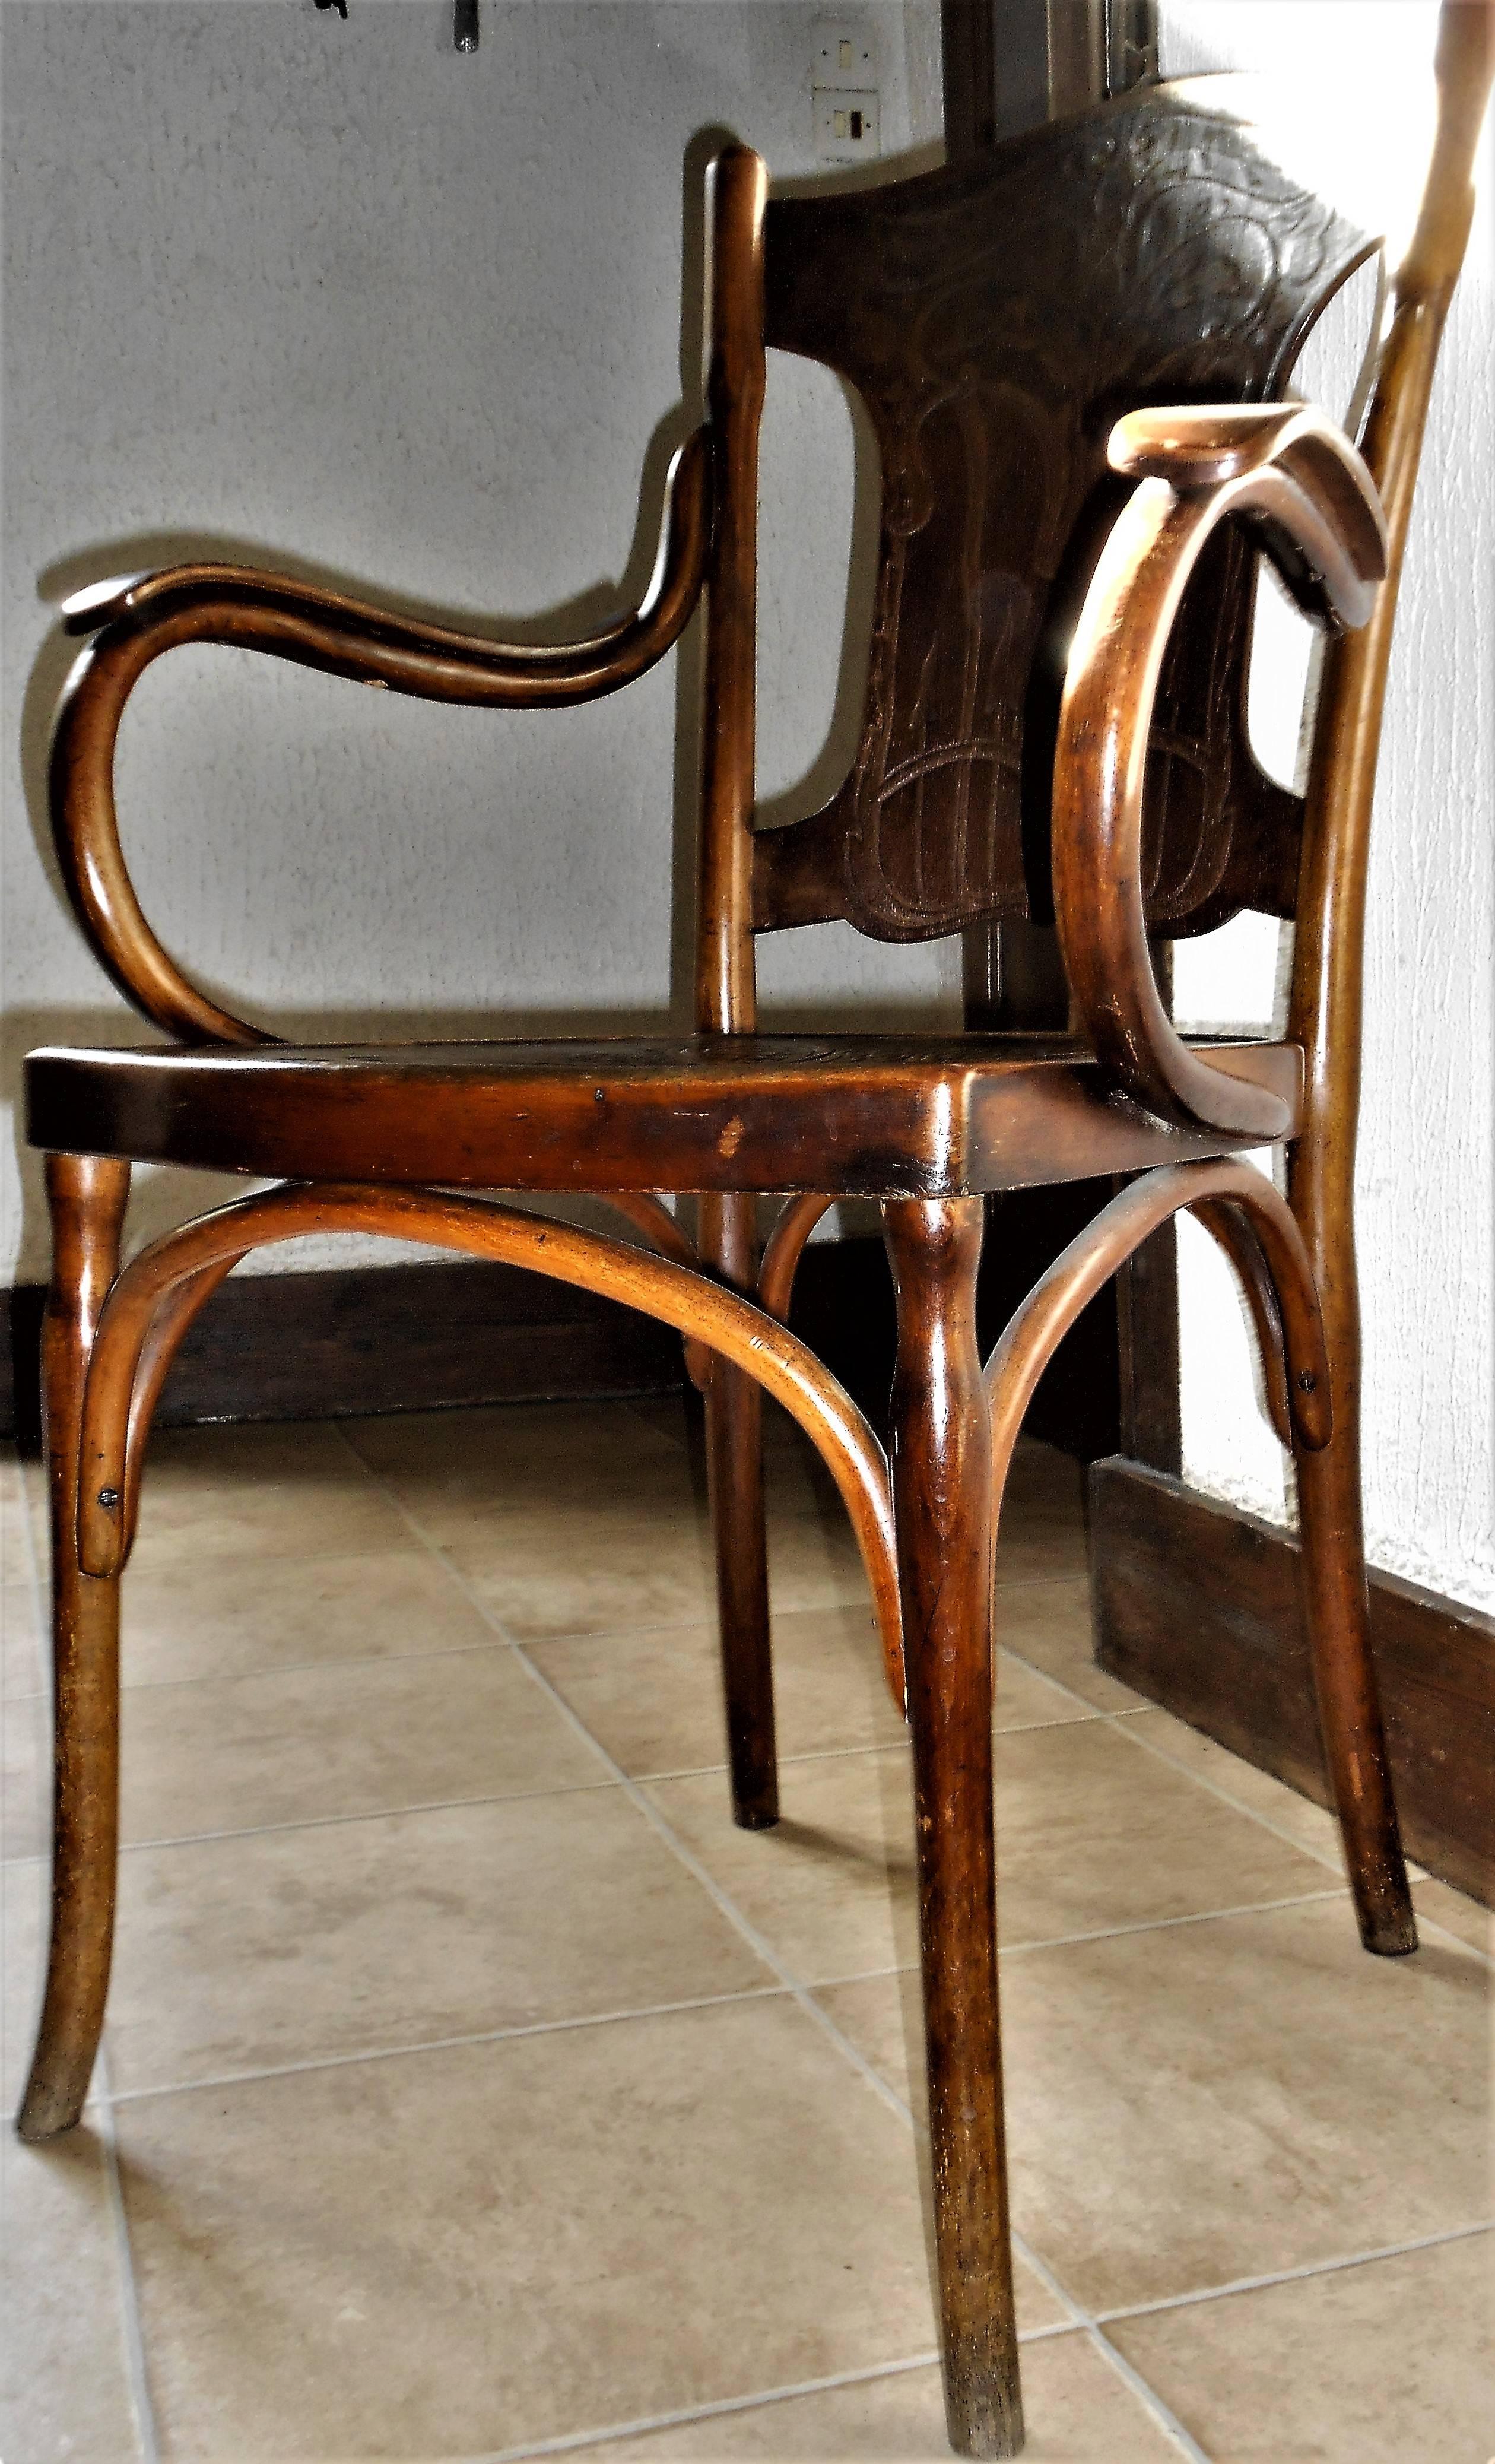 Gorgeous original Art Nouveau armchairs stamped and labeled by JJ Kohn, Vienna, circa 1900.
These bentwood armchairs fit anywhere, they are stunning, rare to find a set like that. Beautiful patina, and they present a great work of
Elegant,